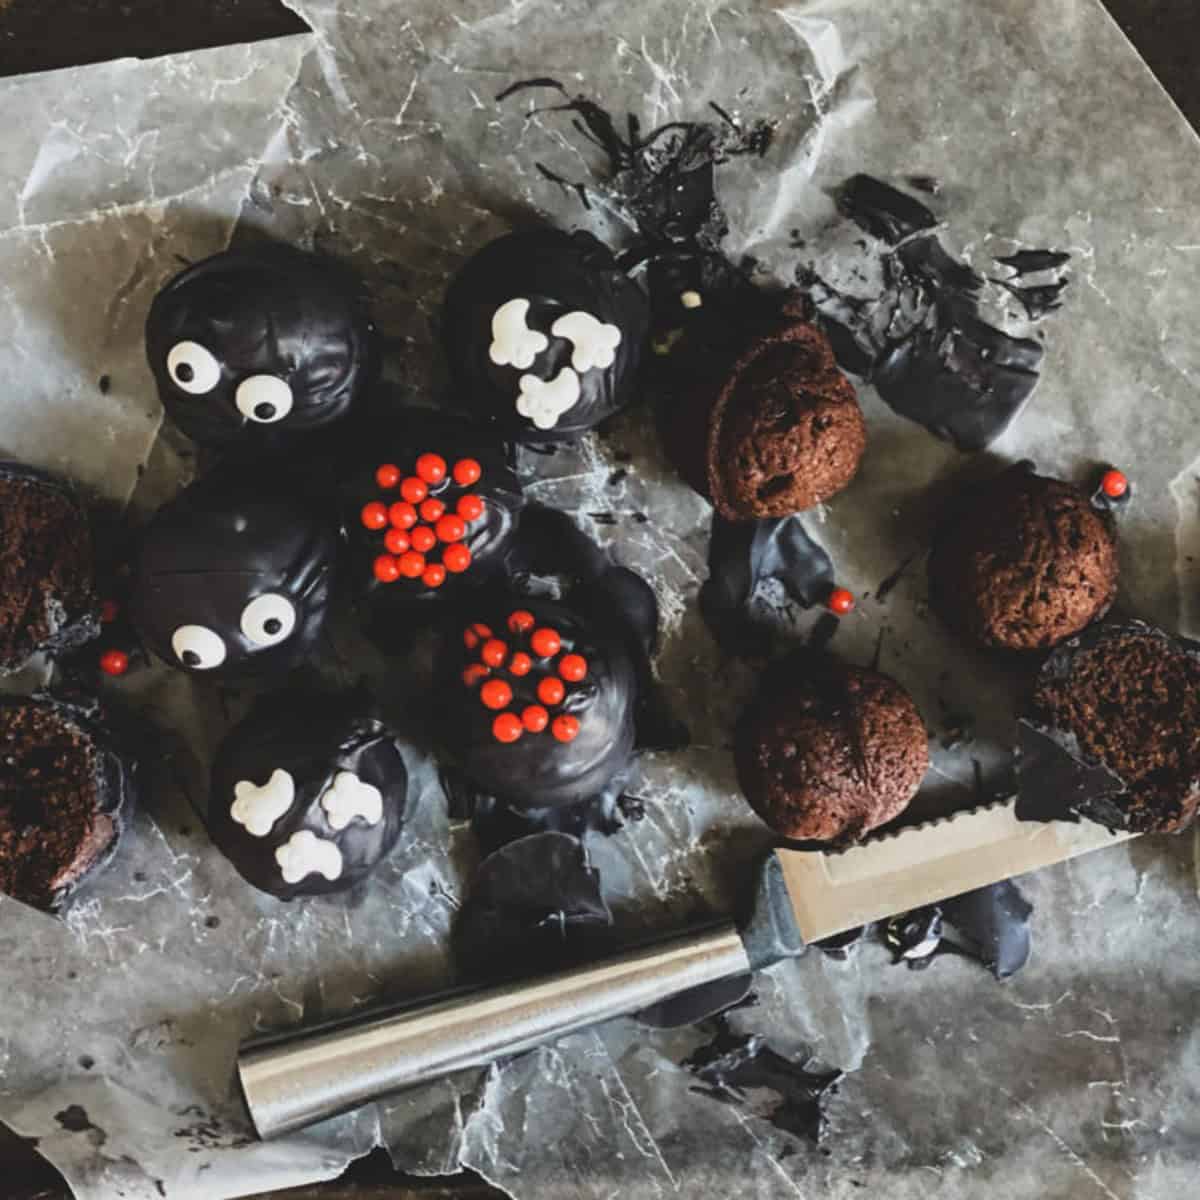 A close-up of a plate filled with chocolate cake ball treats. The treats are round and dusted with colorful sprinkles. Some treats have googly eyes added for a spooky look. A small silver knife sits on the edge of the plate.